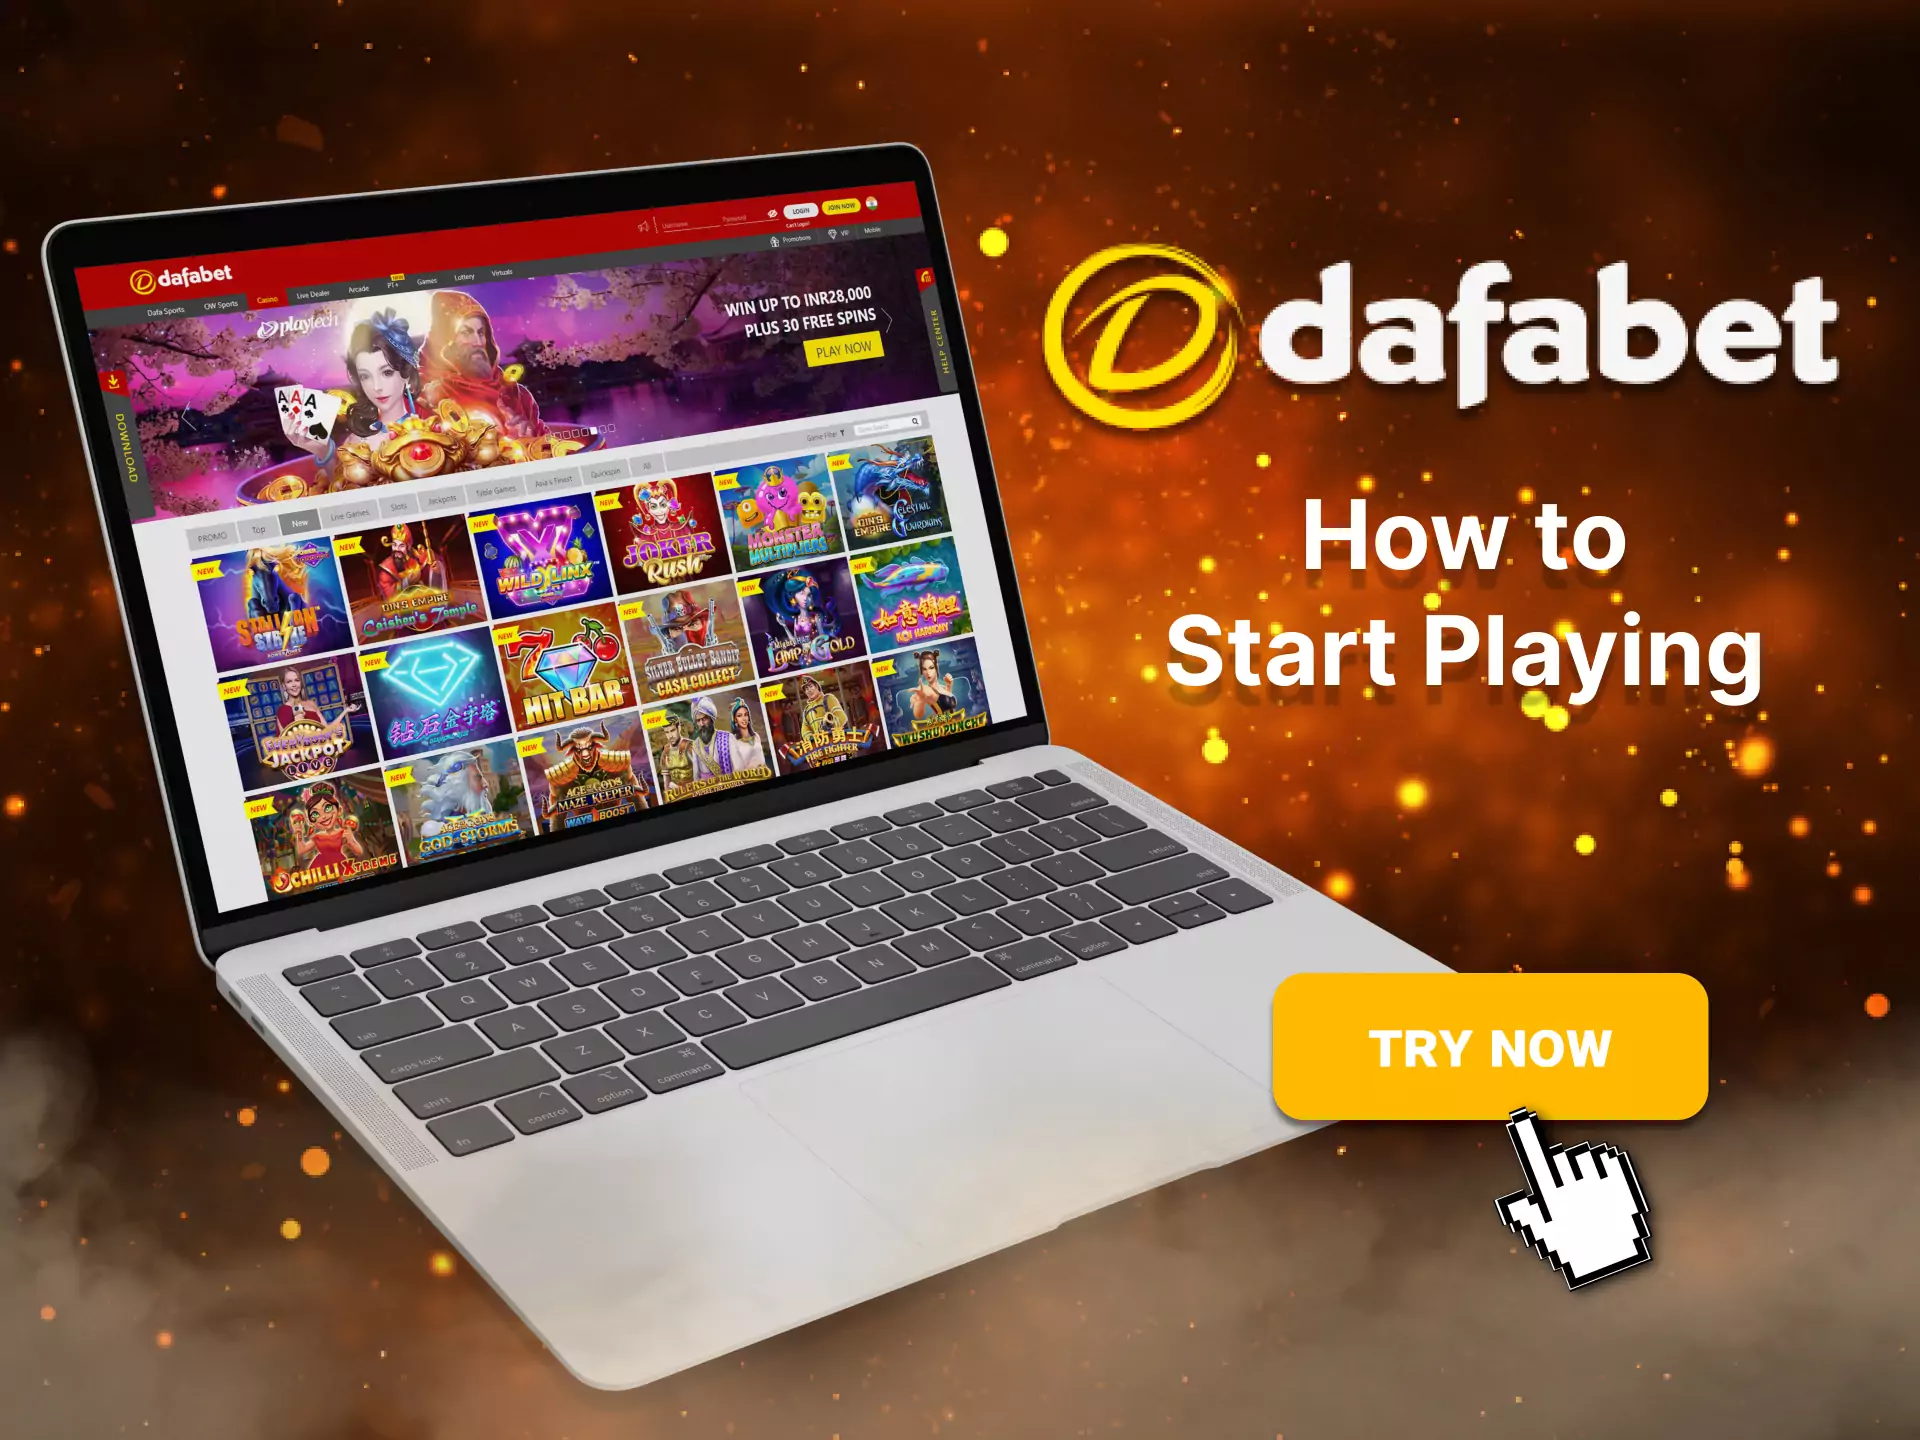 Use the instructions to make your first bet in Dafabet.